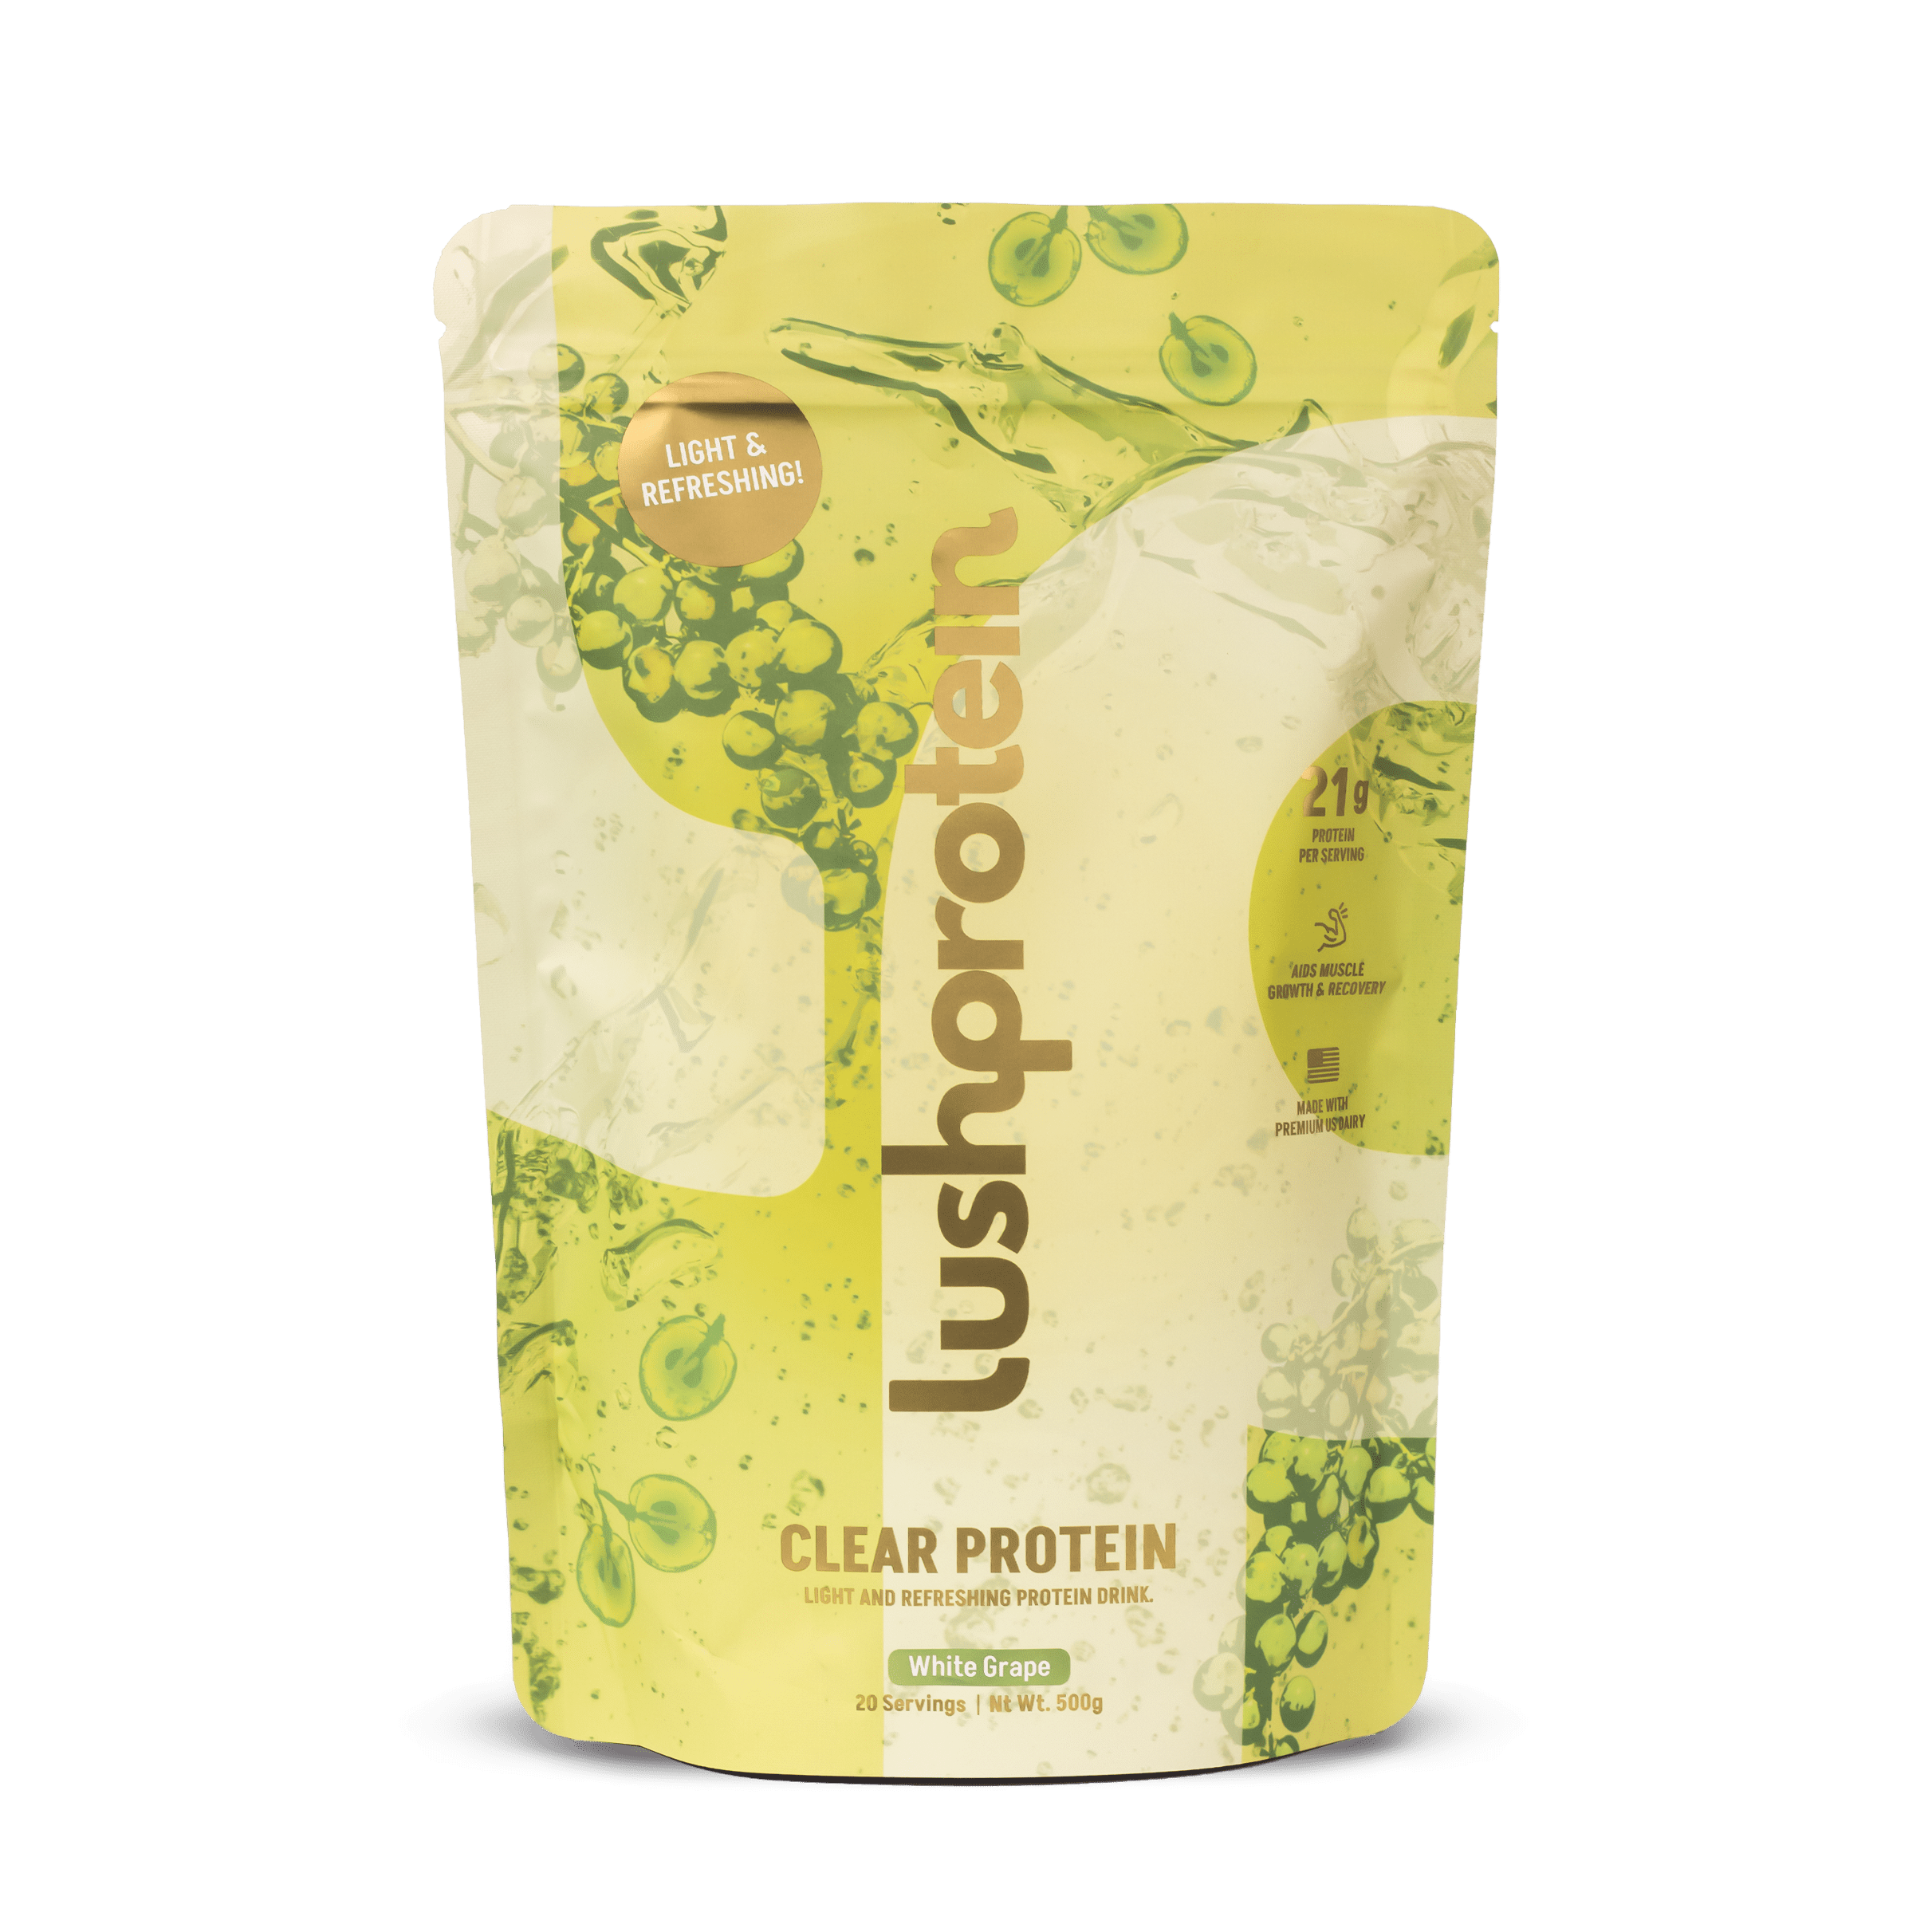 CLEAR PROTEIN - lushprotein